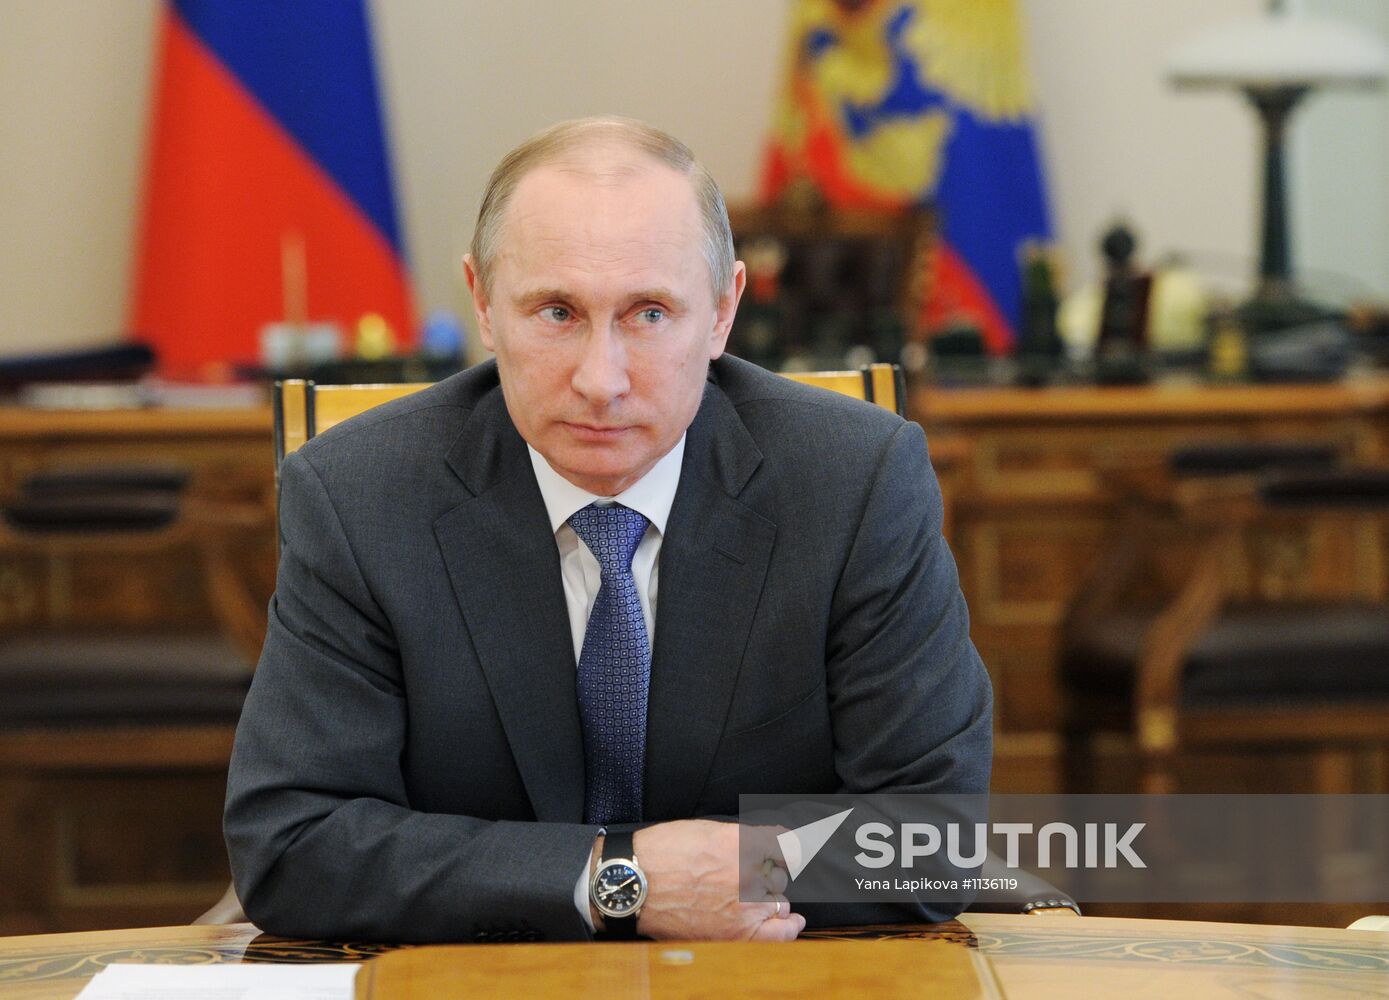 Vladimir Putin chairs meeting on state defense contract pricing